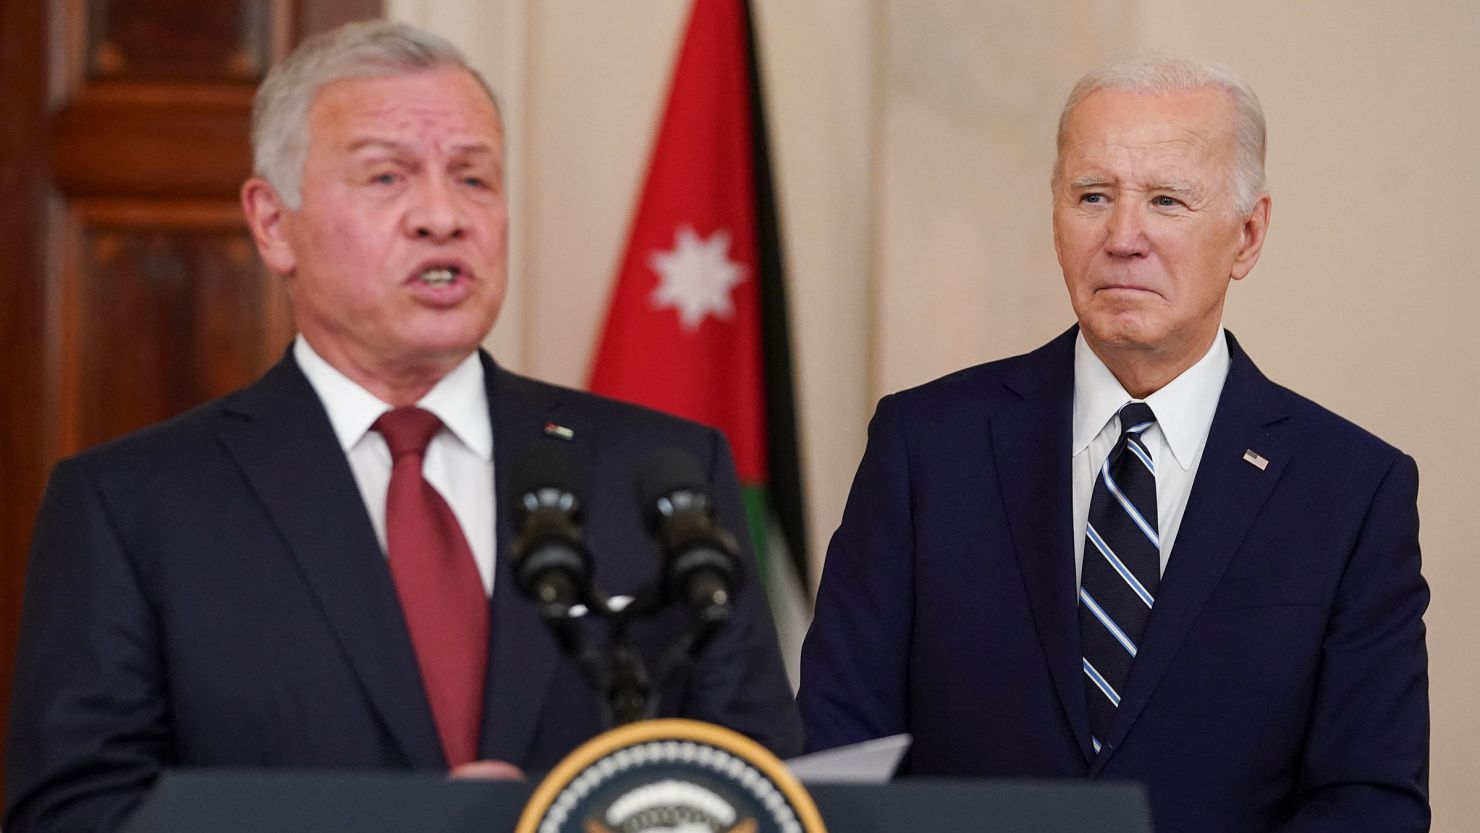 President Joe Biden watches as Jordan's King Abdullah delivers following their meeting at the White House in Washington, DC, on February 12.